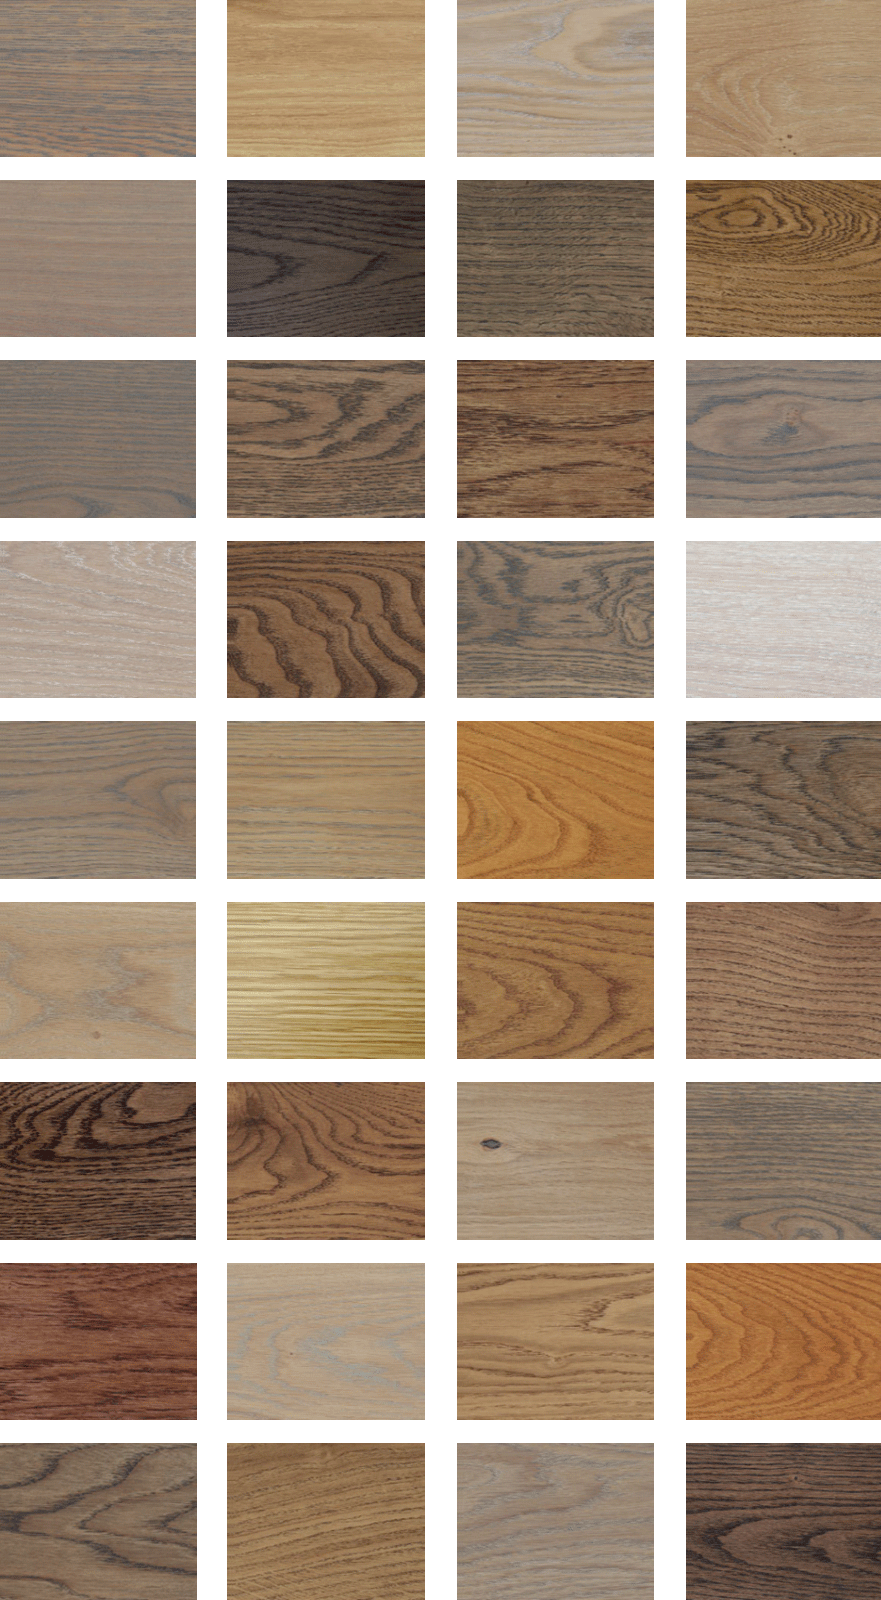 View our hard wax oil finish colors.